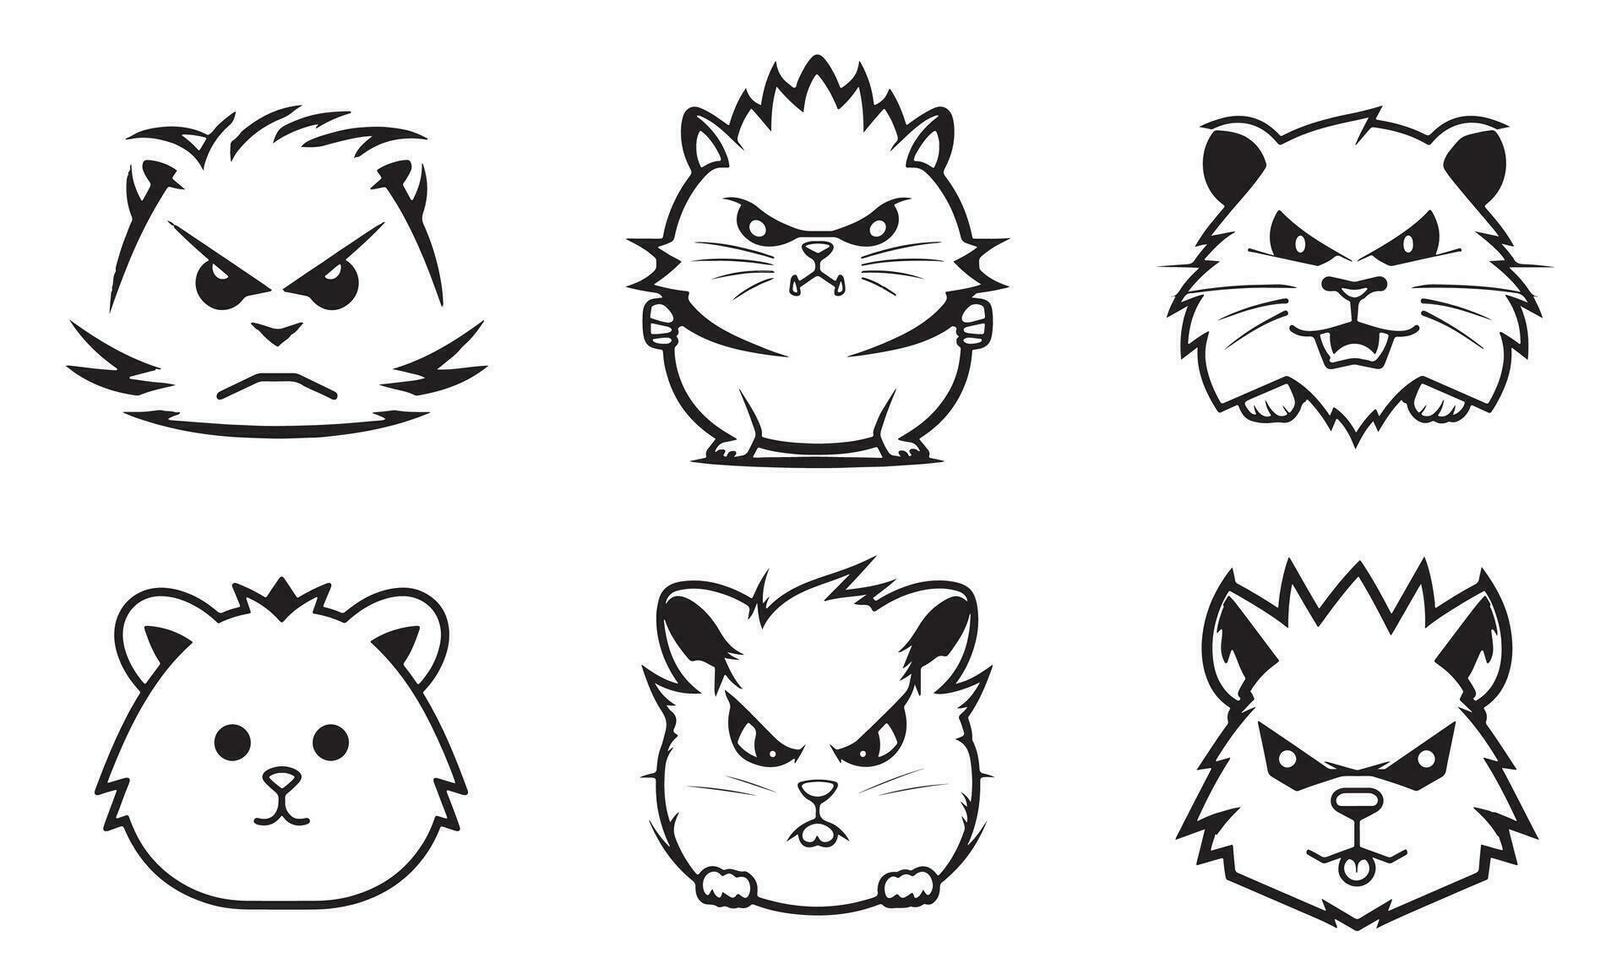 Angry Hamster set Vector Illustration isolated on white background. Hamster Mascot Cartoon Character